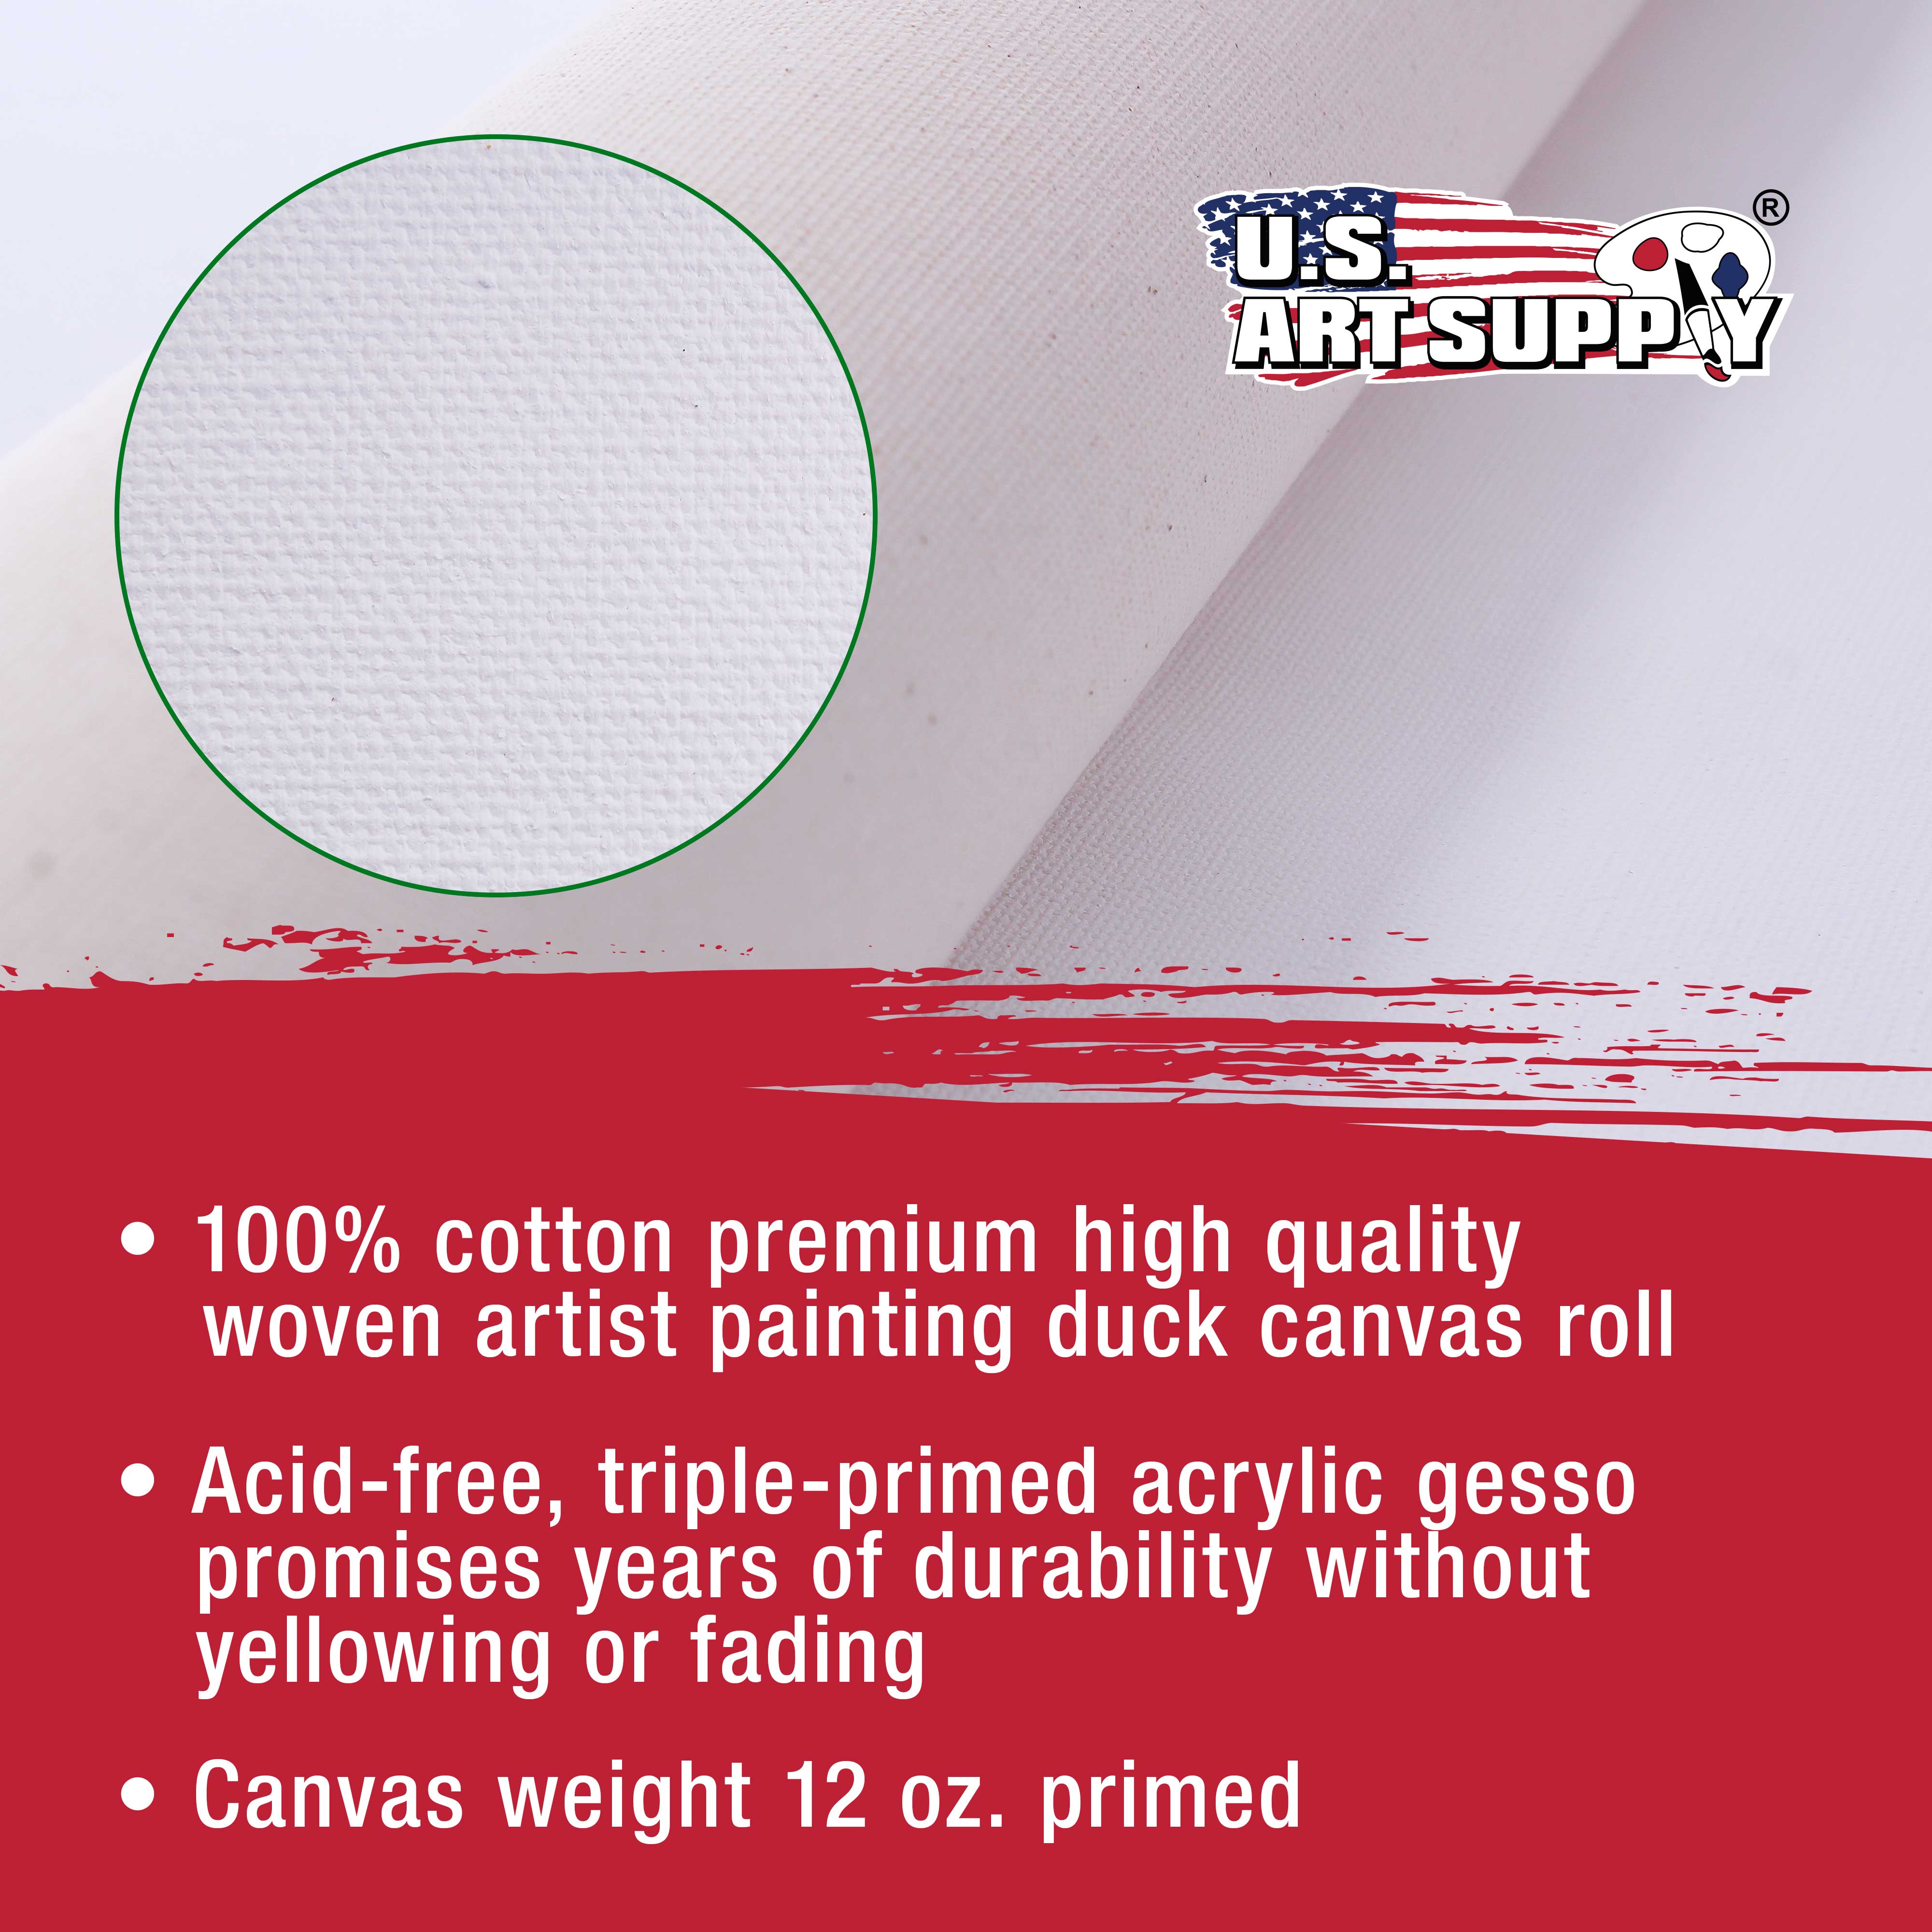 63" 100% Cotton Canvas Roll - 6 Yards